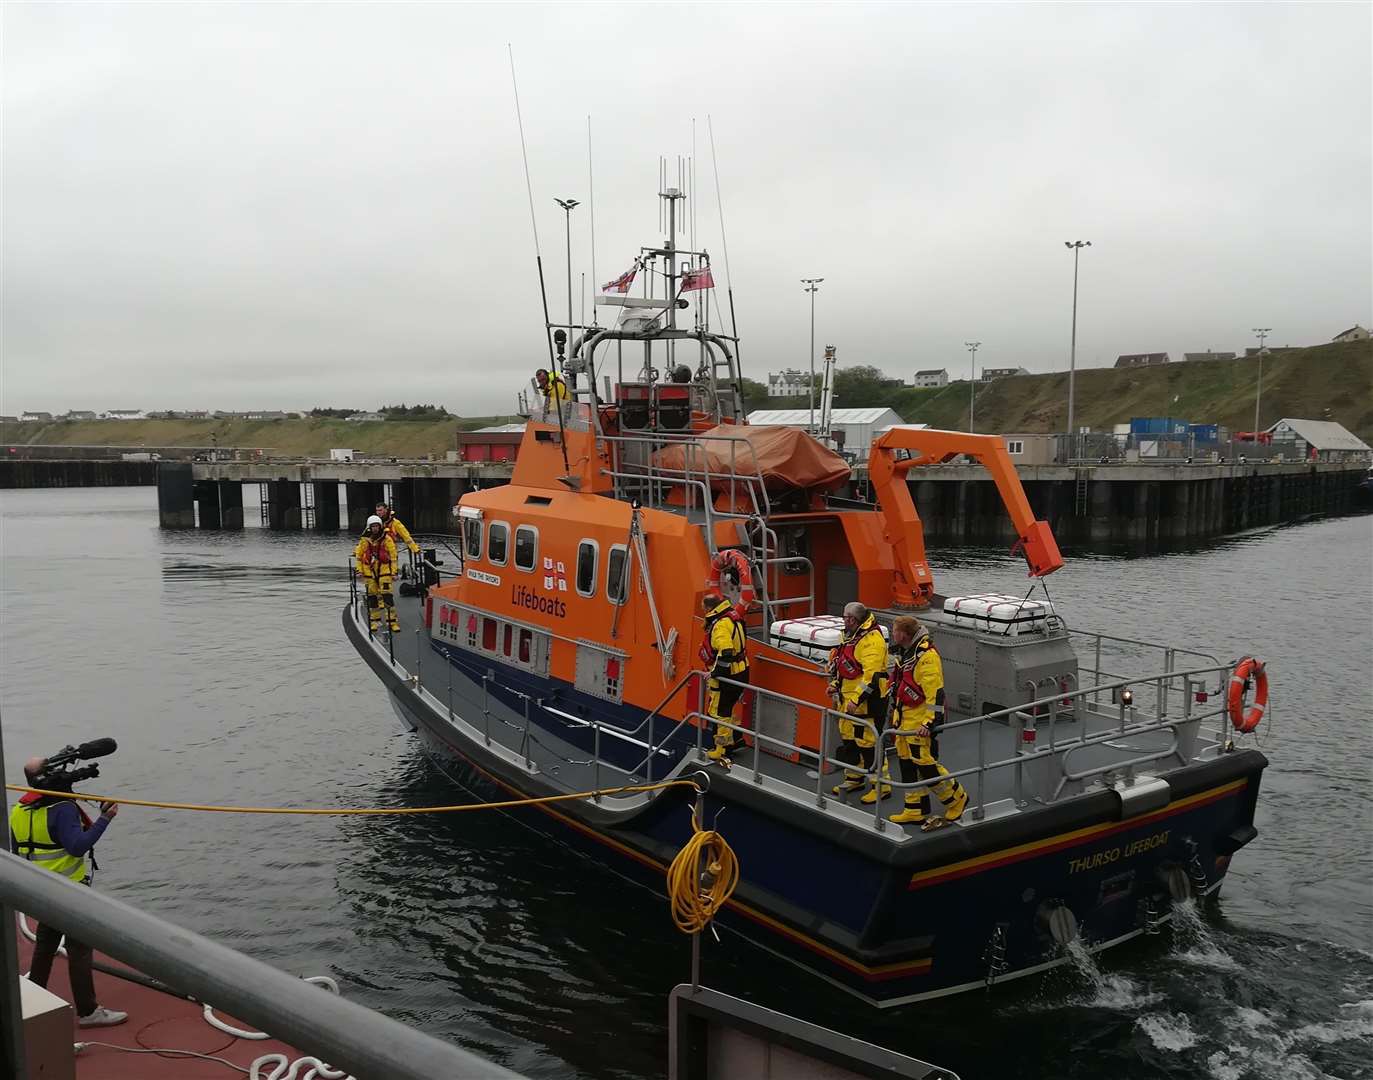 Thurso lifeboat features in the BBC TV series Saving Lives at Sea on October 8.